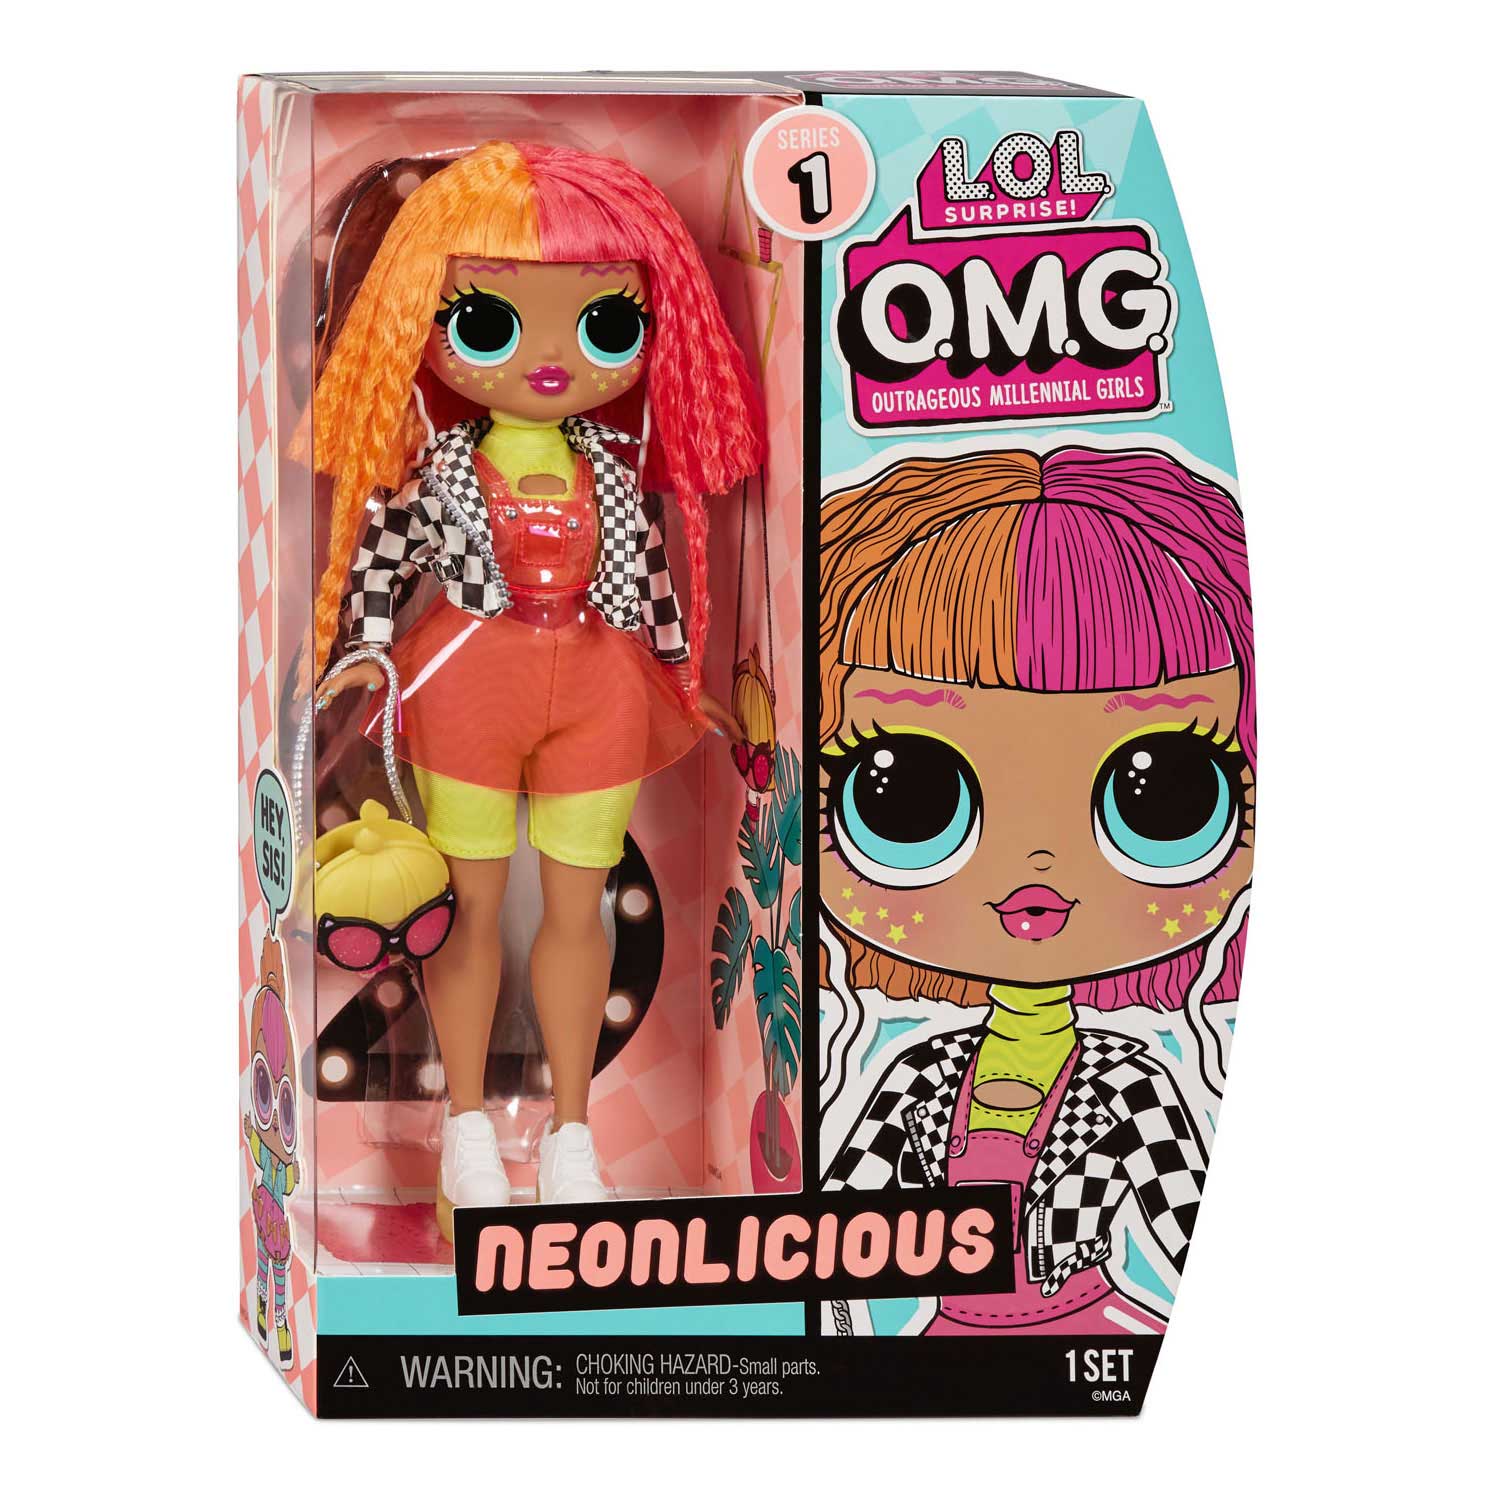 L.O.L. Surprise OMG Core Doll Series - Neonlicious